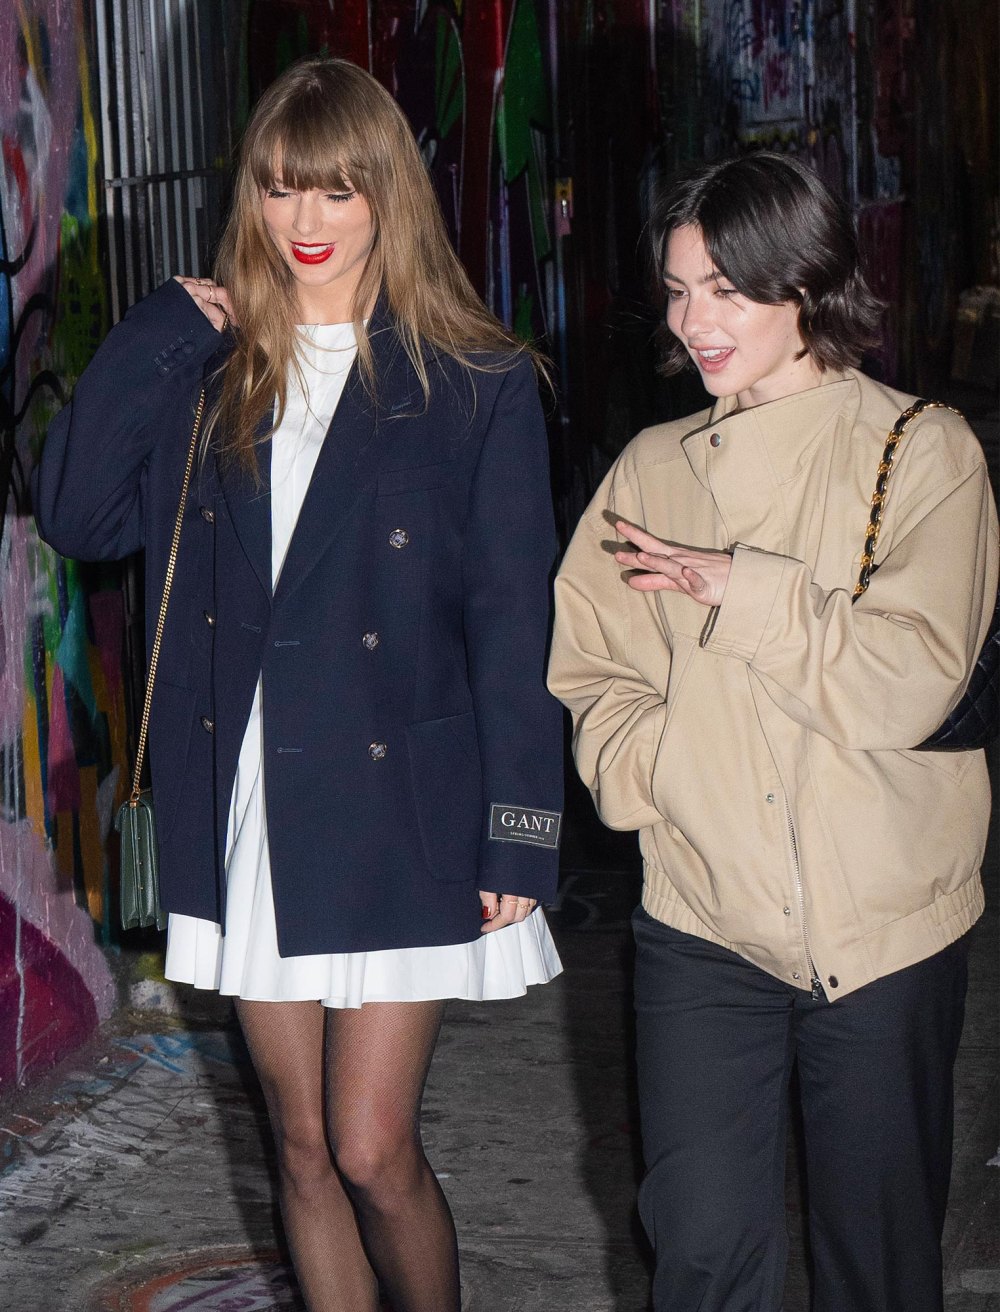 Gracie Abrams Reveals What Taylor Swift Song She Was Listening to In Viral Crying Photos 576